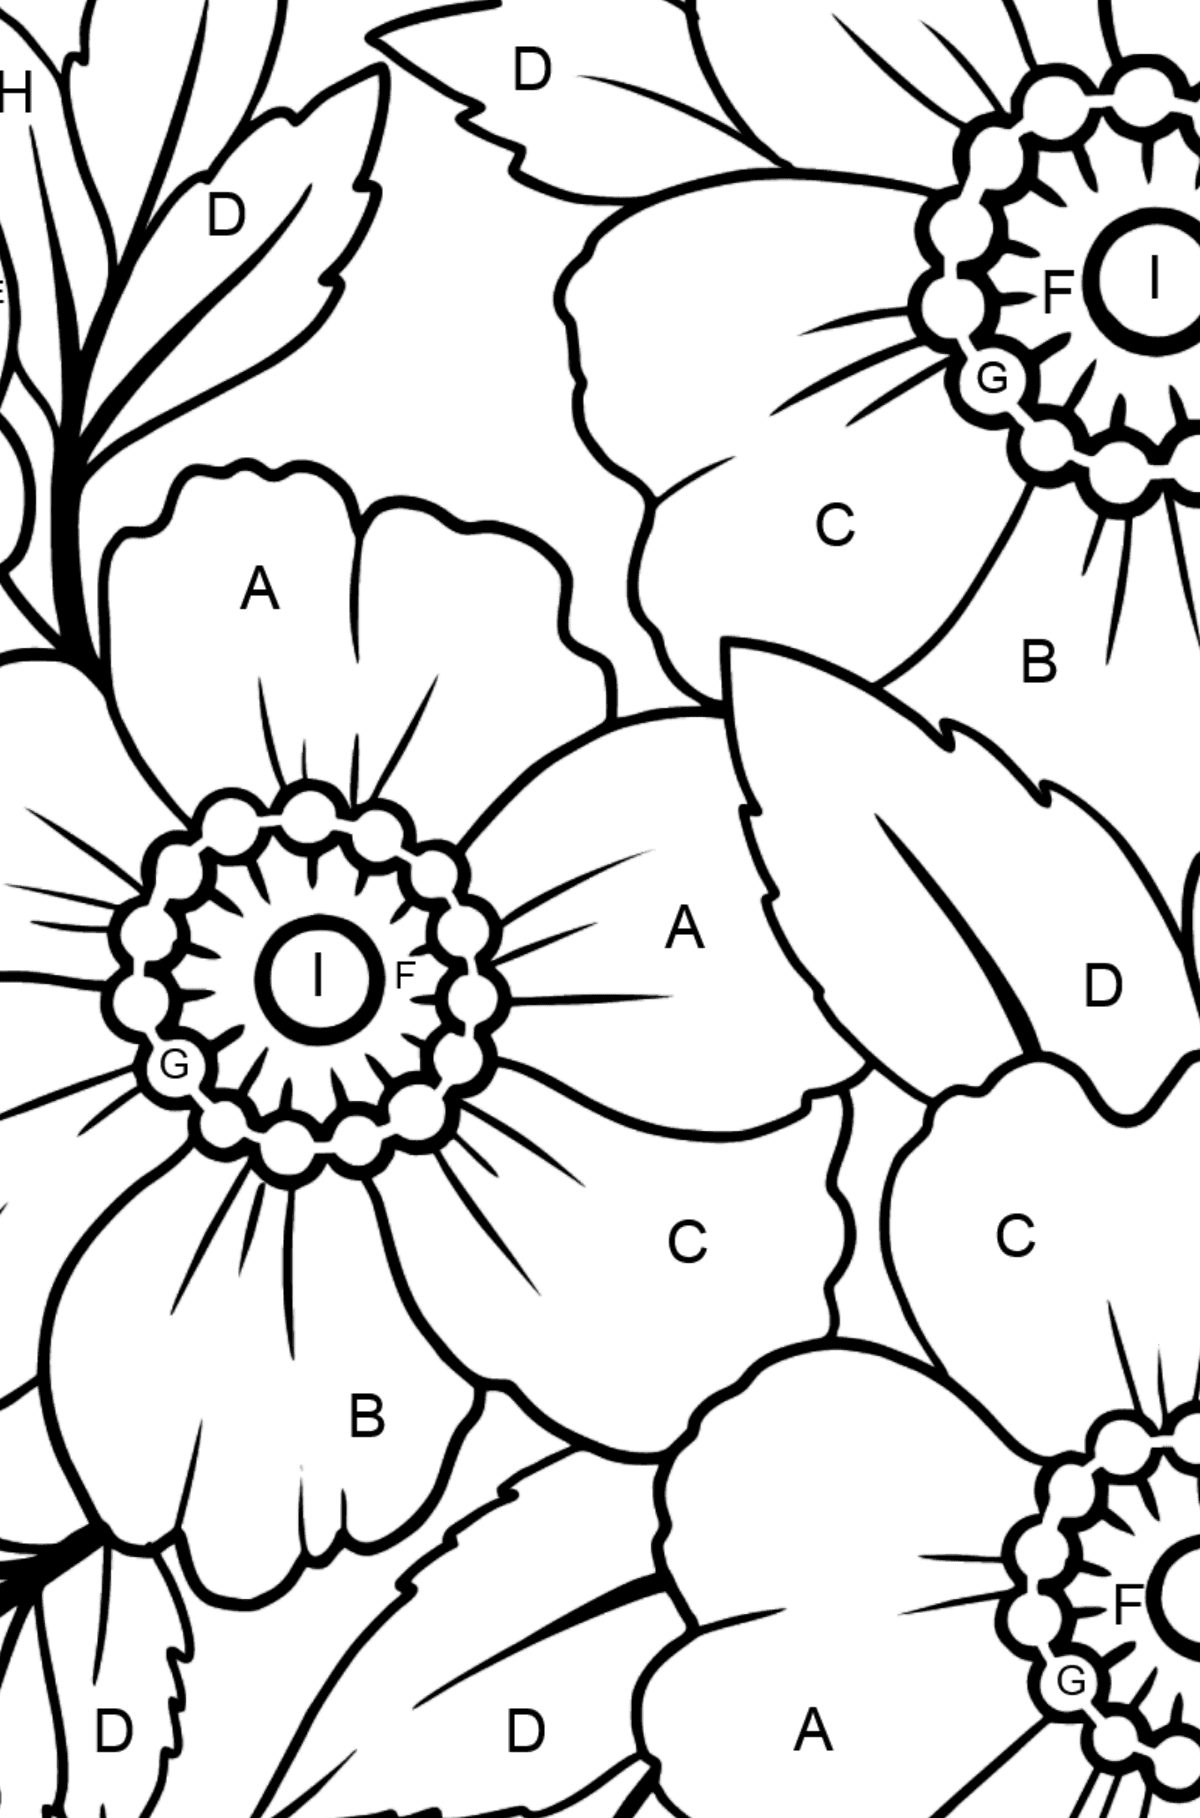 Flower Coloring Page (A4) - A Japanese Anemone with Pink Petals - Coloring by Letters for Kids